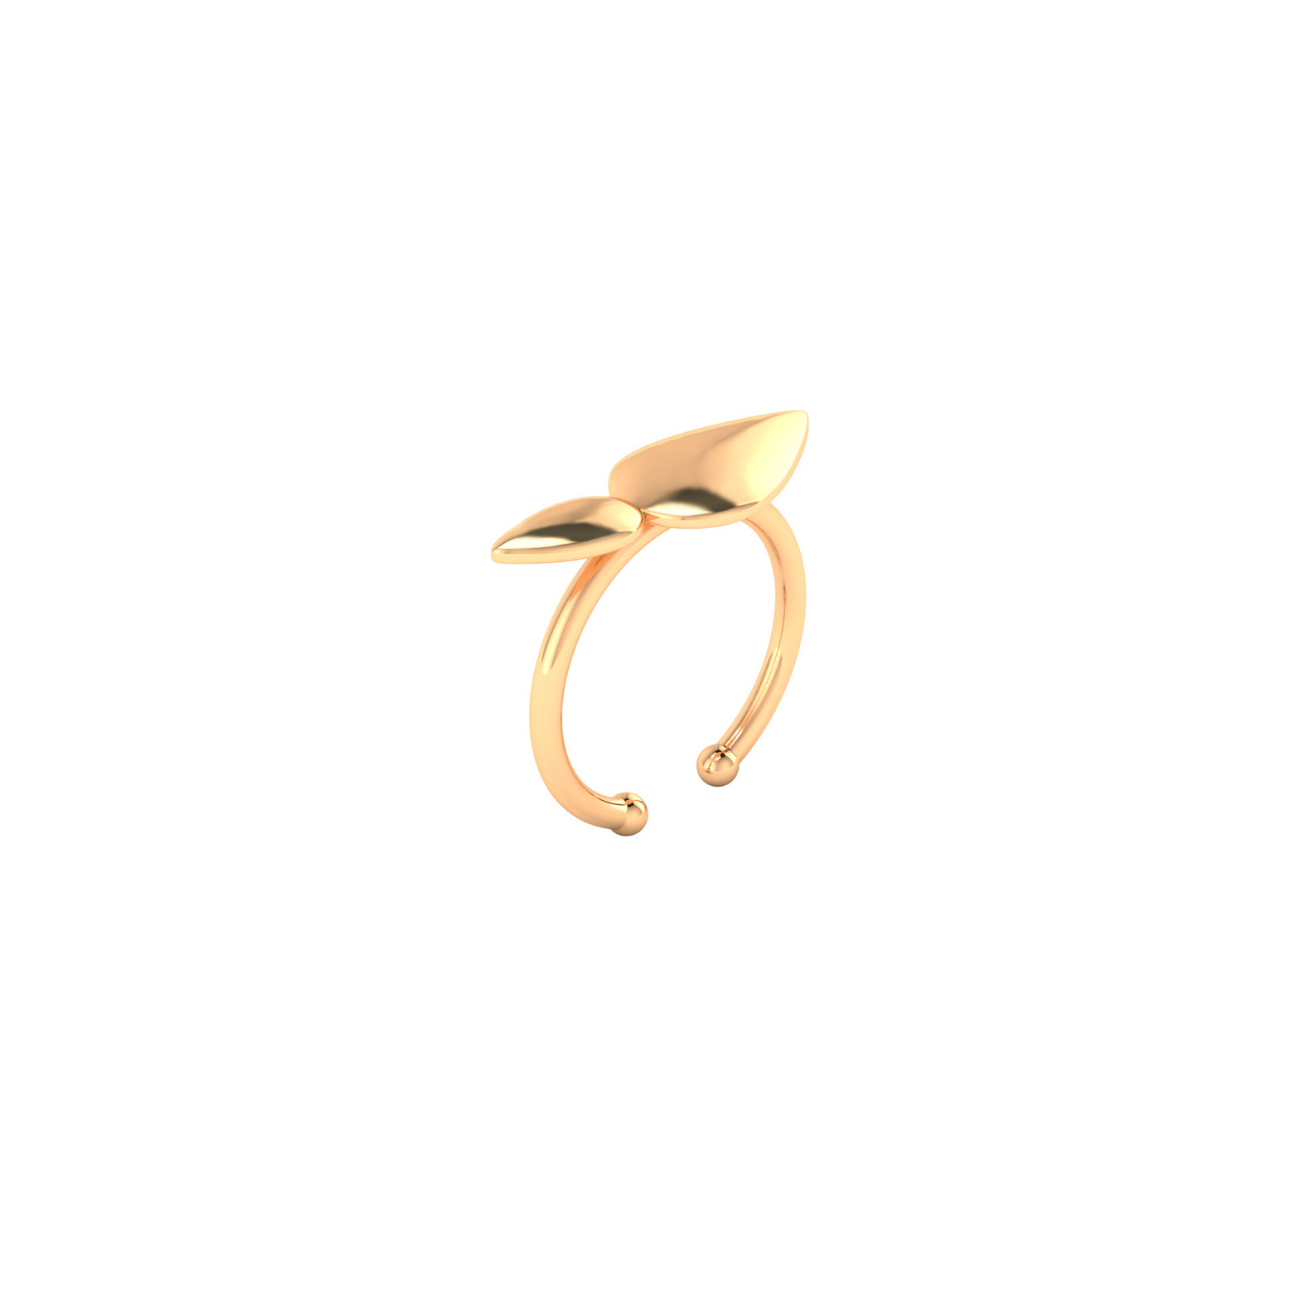 Lotus ring, small leaves, 18k gold